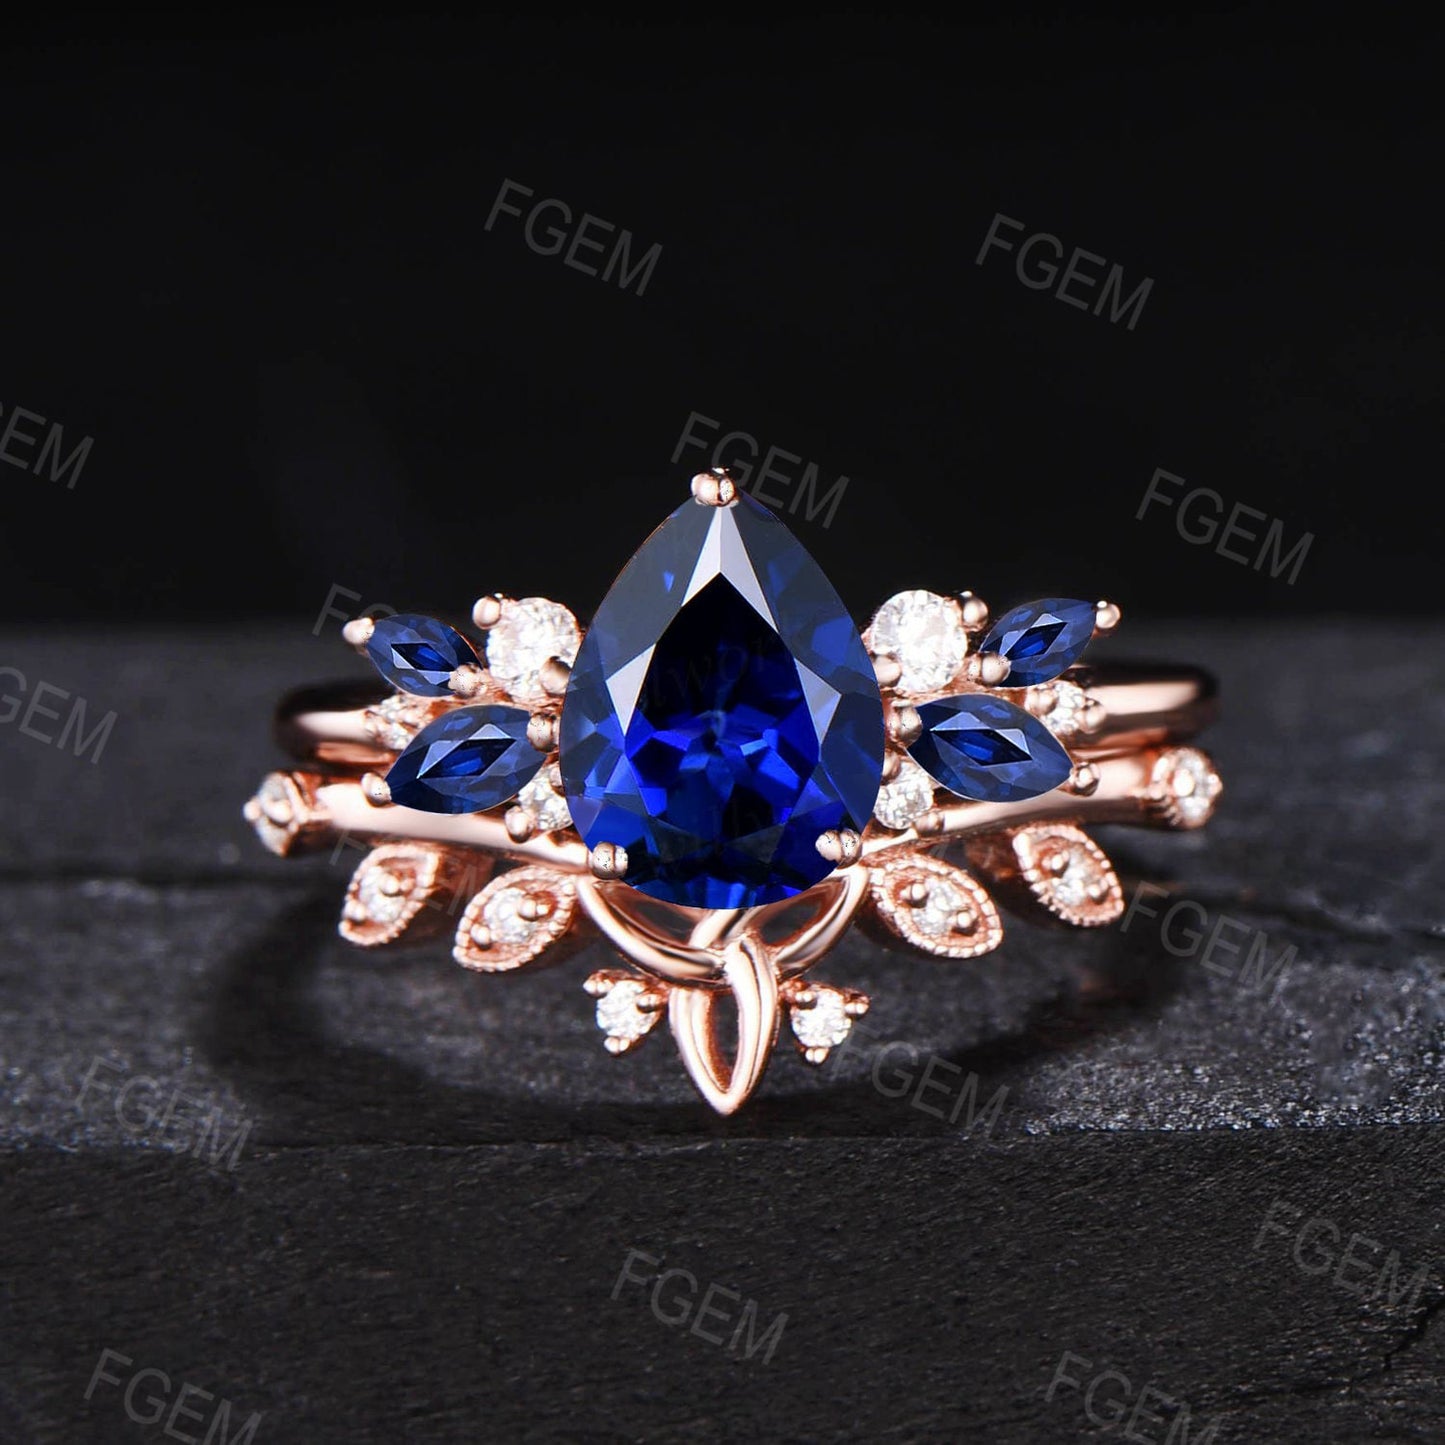 Unique 1.25CT Pear Shaped Nature Inspired Blue Sapphire Engagement Ring Moissanite Wedding Ring Cluster Ring 14K Rose Gold Celtic Bridal Set